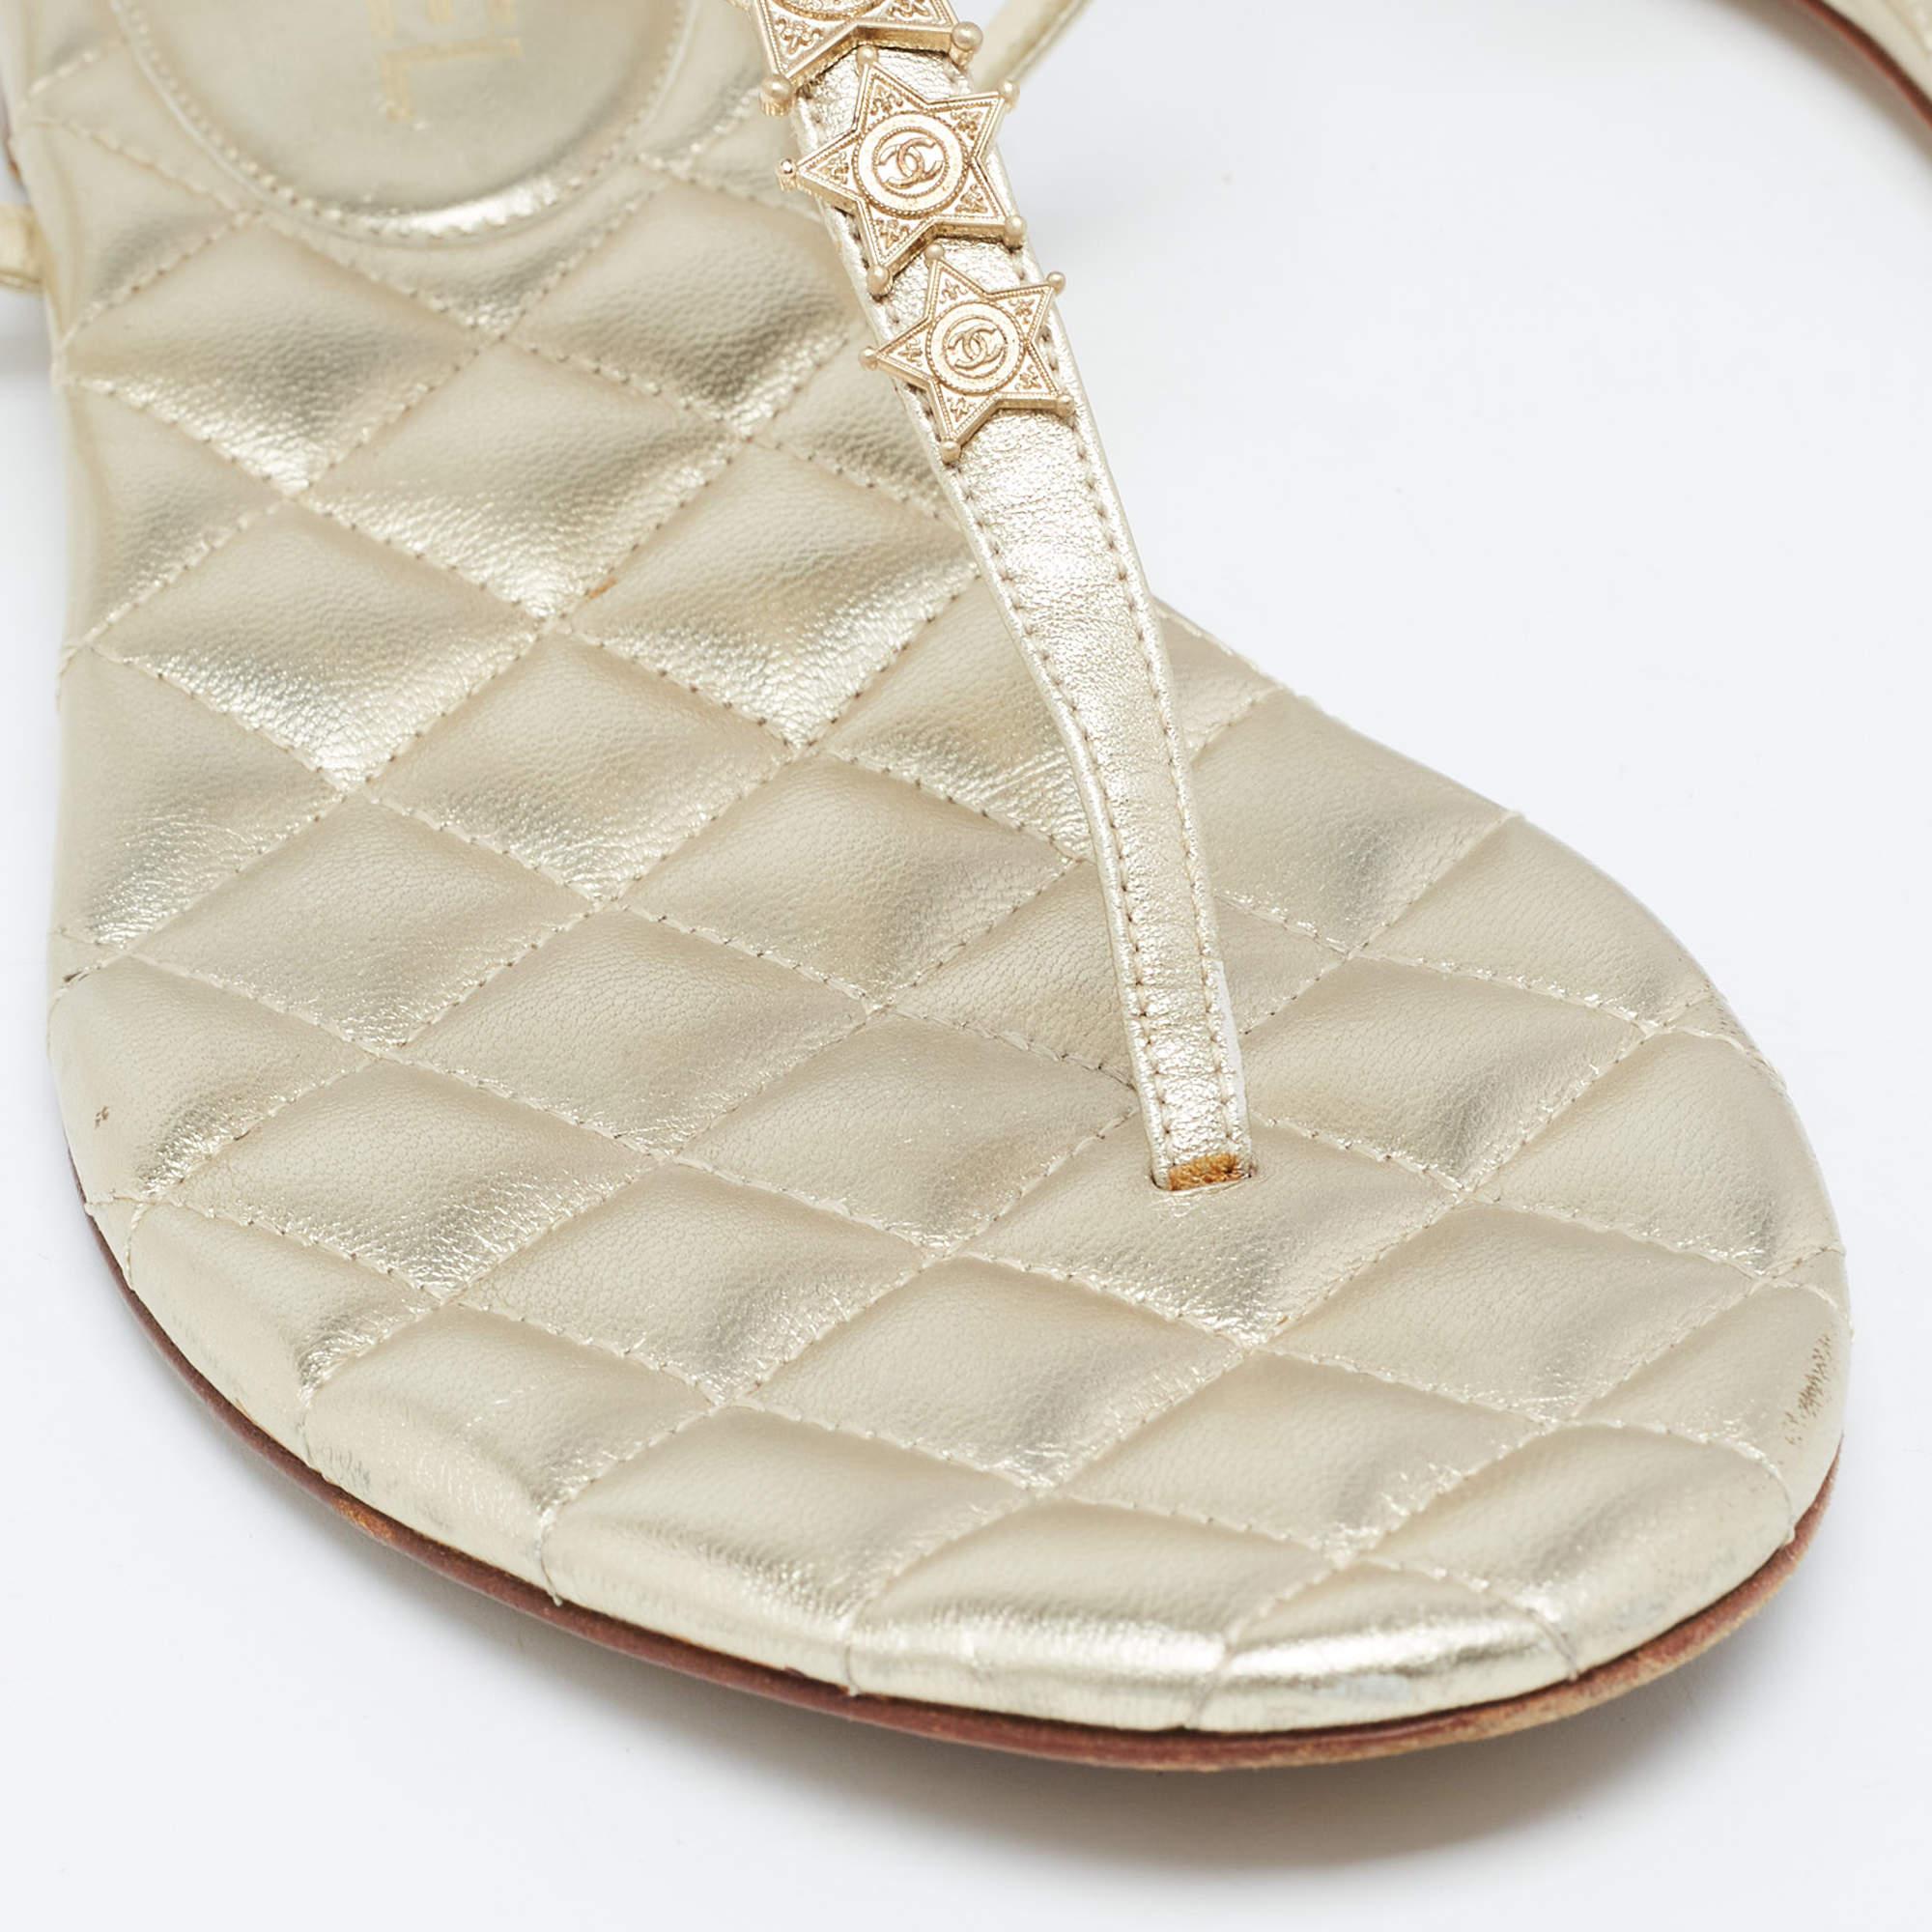 Women's Chanel Gold Leather CC Star Embellished Thong Flat Sandals Size 40